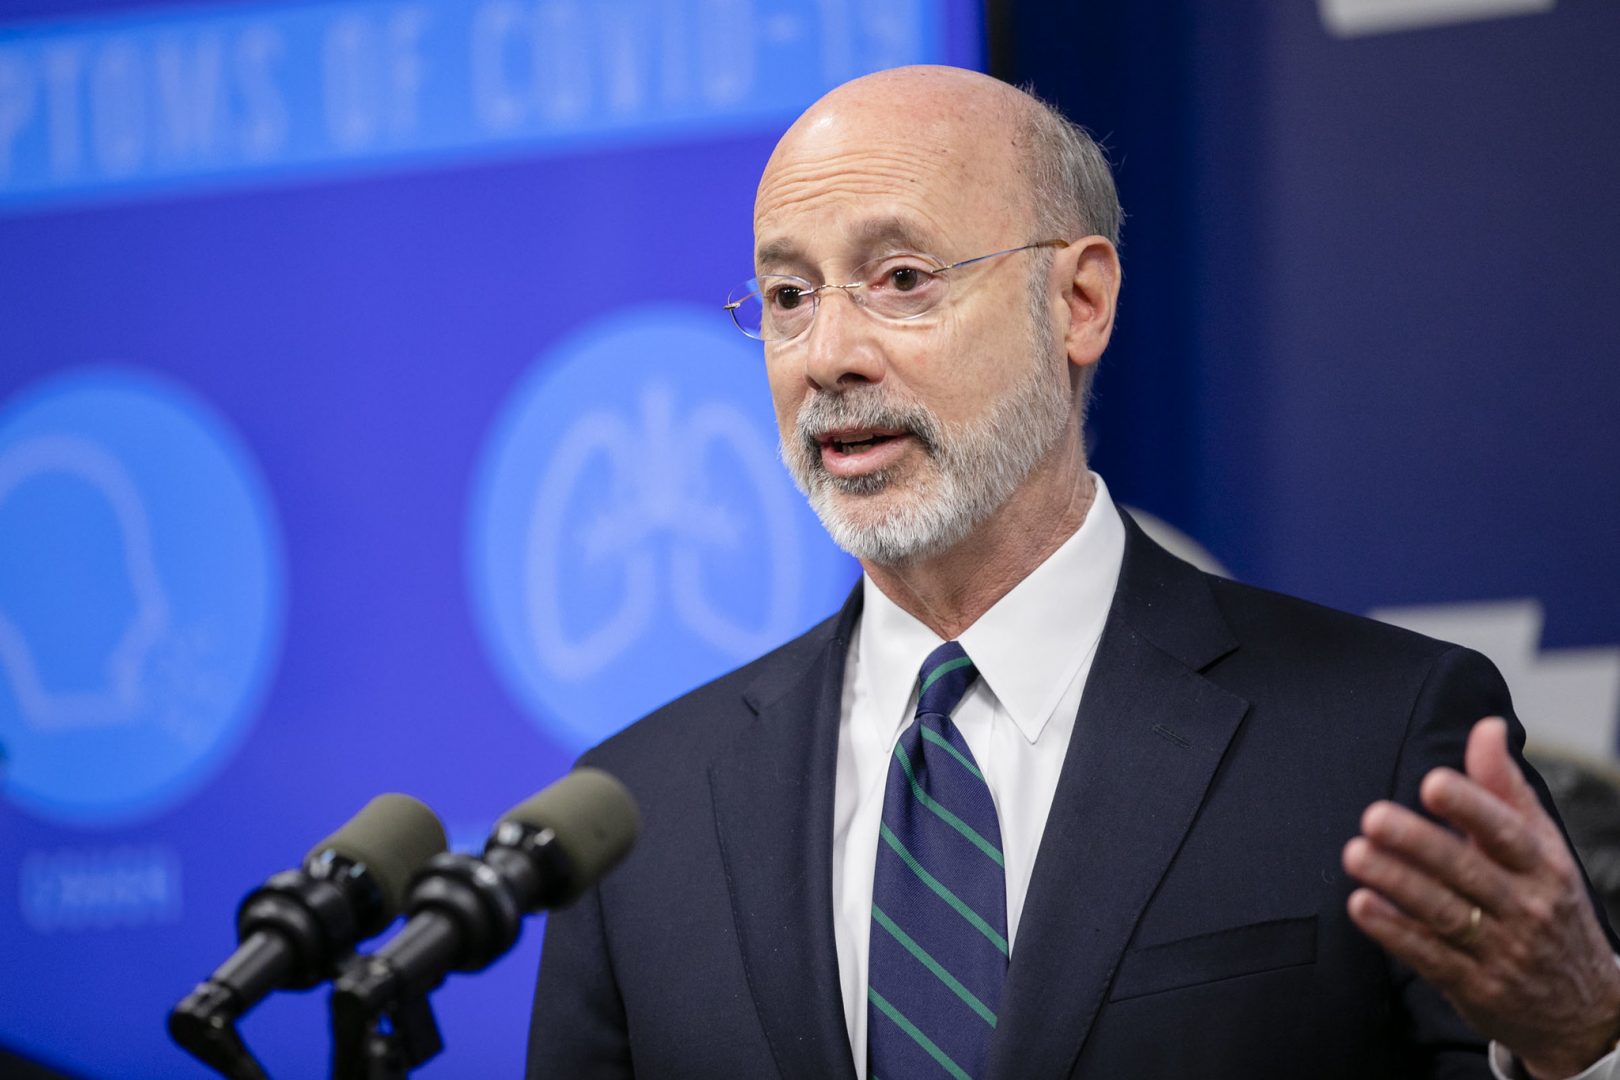 Gov. Tom Wolf confirms the state's first two presumptive positive cases of COVID-19 during press conference on March 6, 2020.